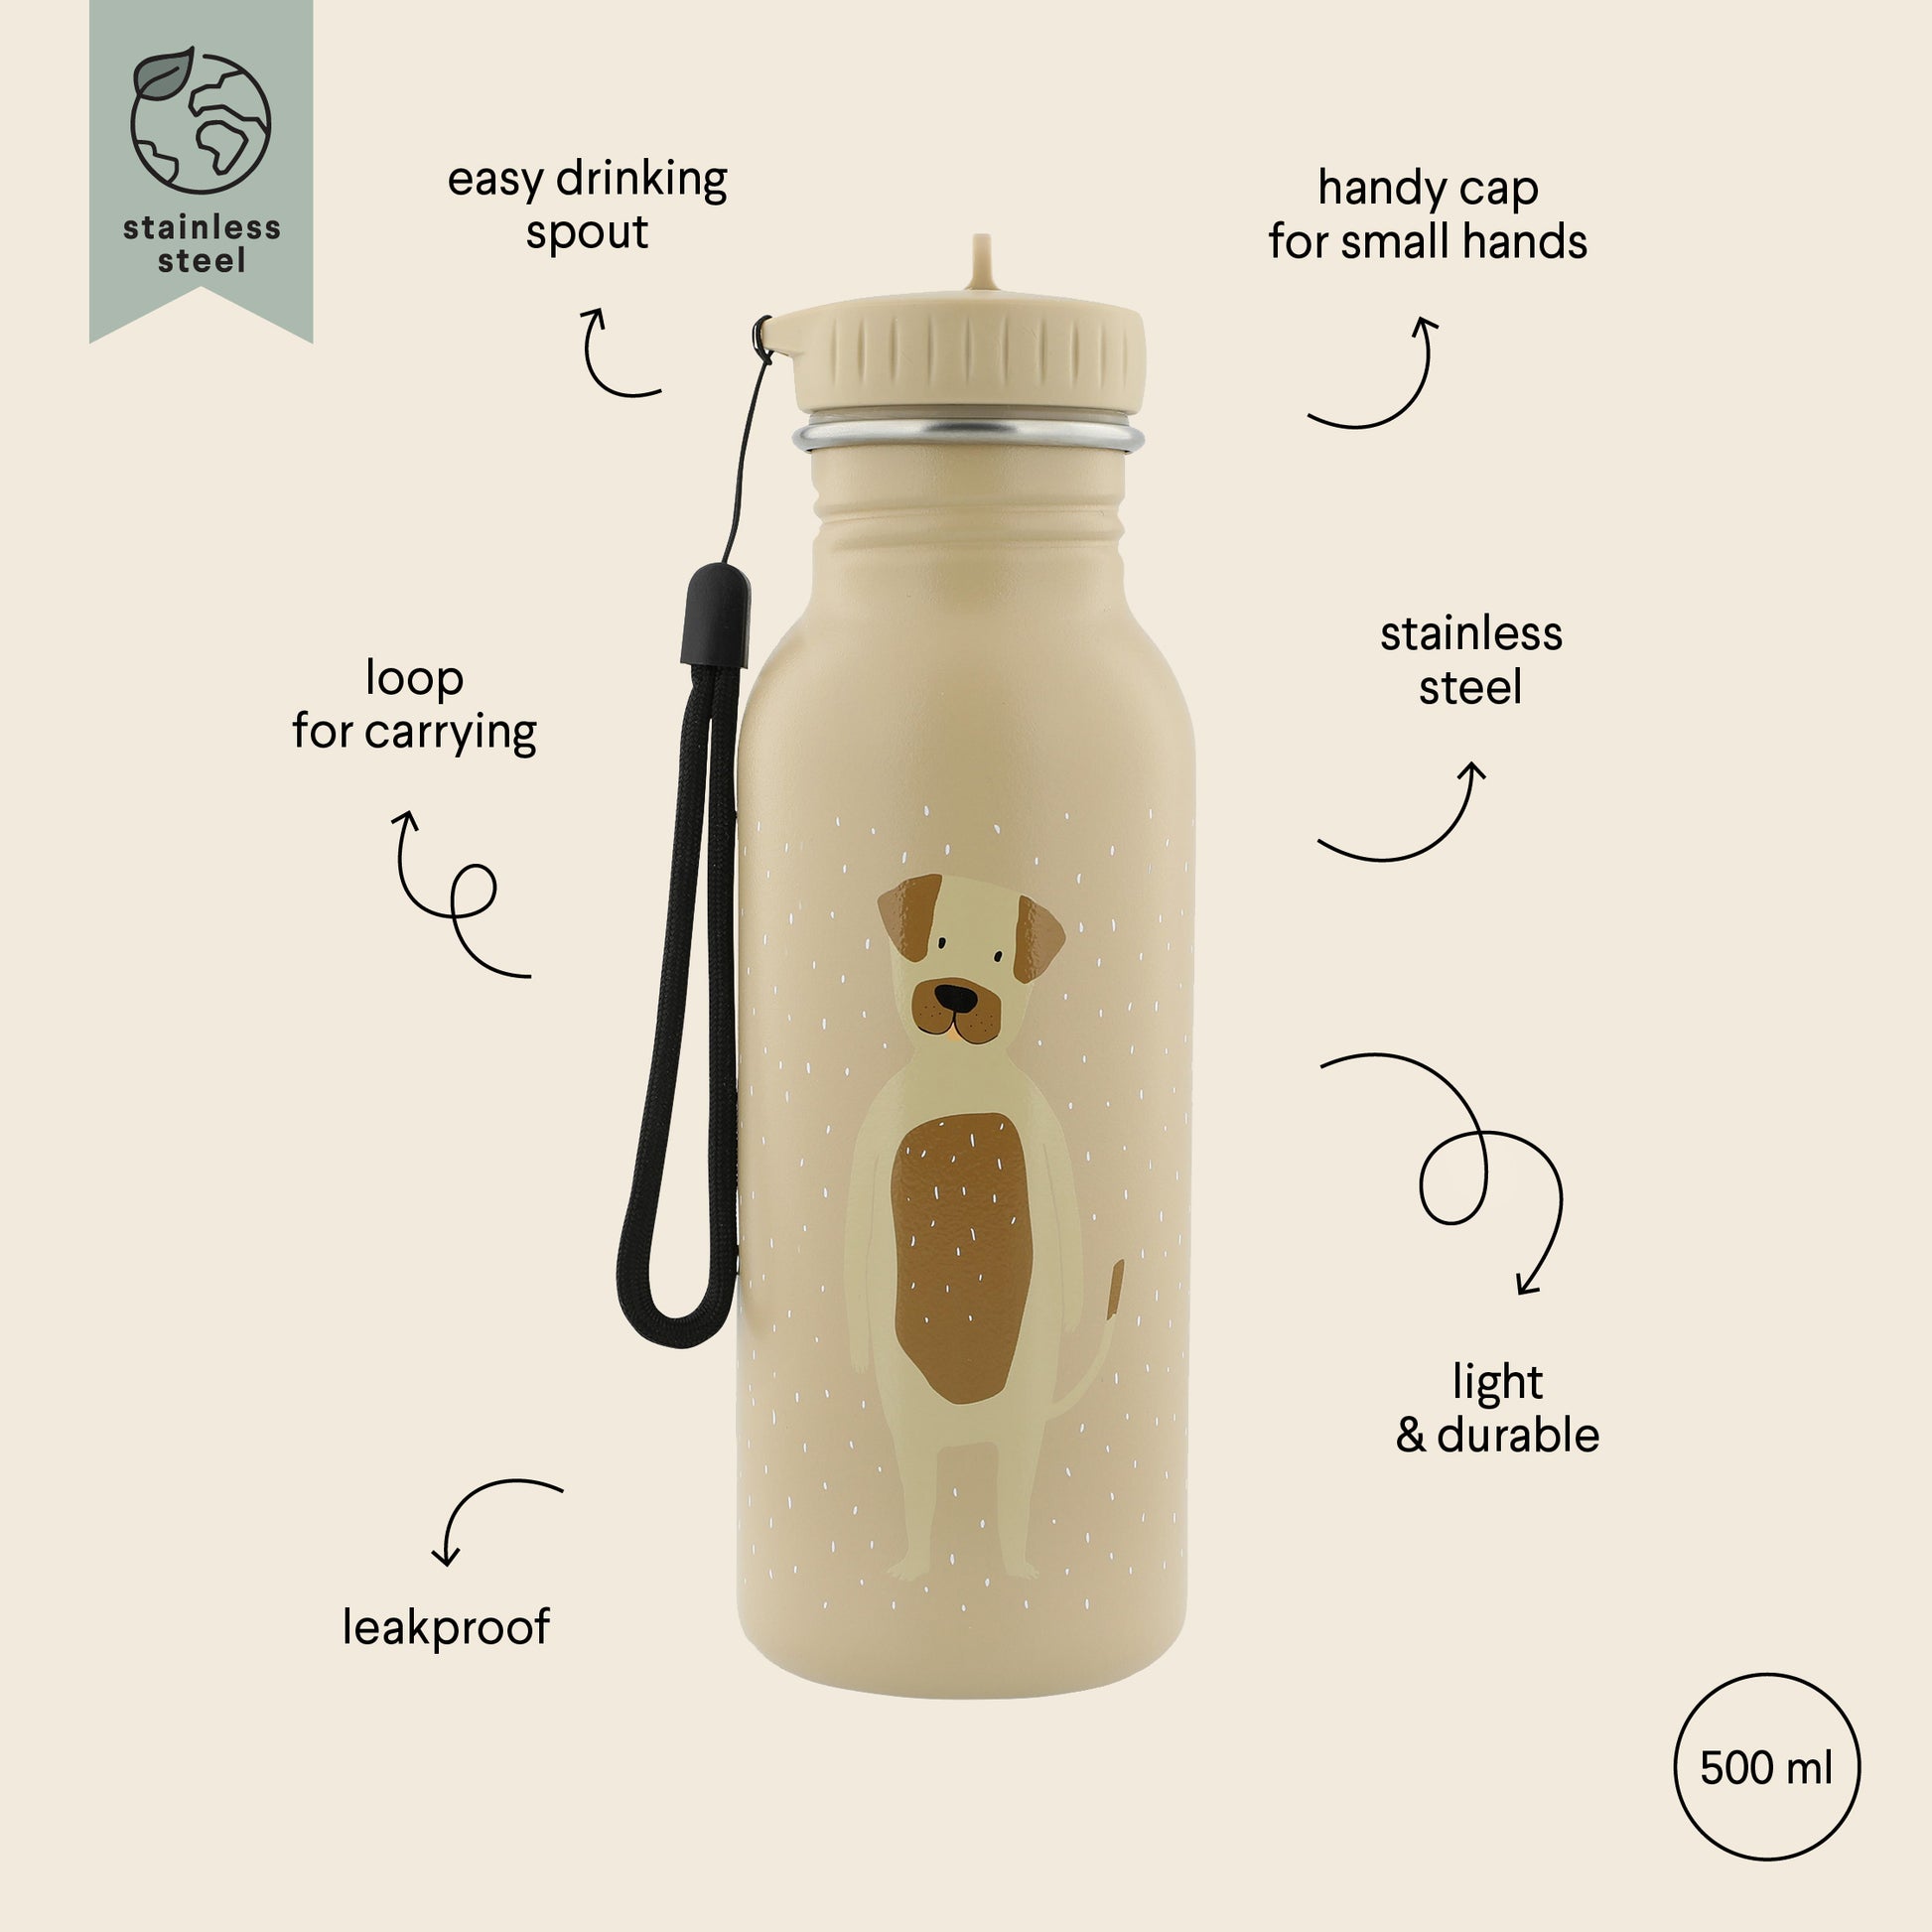 Stainless Steel Bottle 500 ml featuring Mr Dog design, ideal for kids on-the-go. Durable stainless steel construction, leak-proof, with easy-to-open cap and carry loop. Dimensions: 20 cm x 6.5 cm.